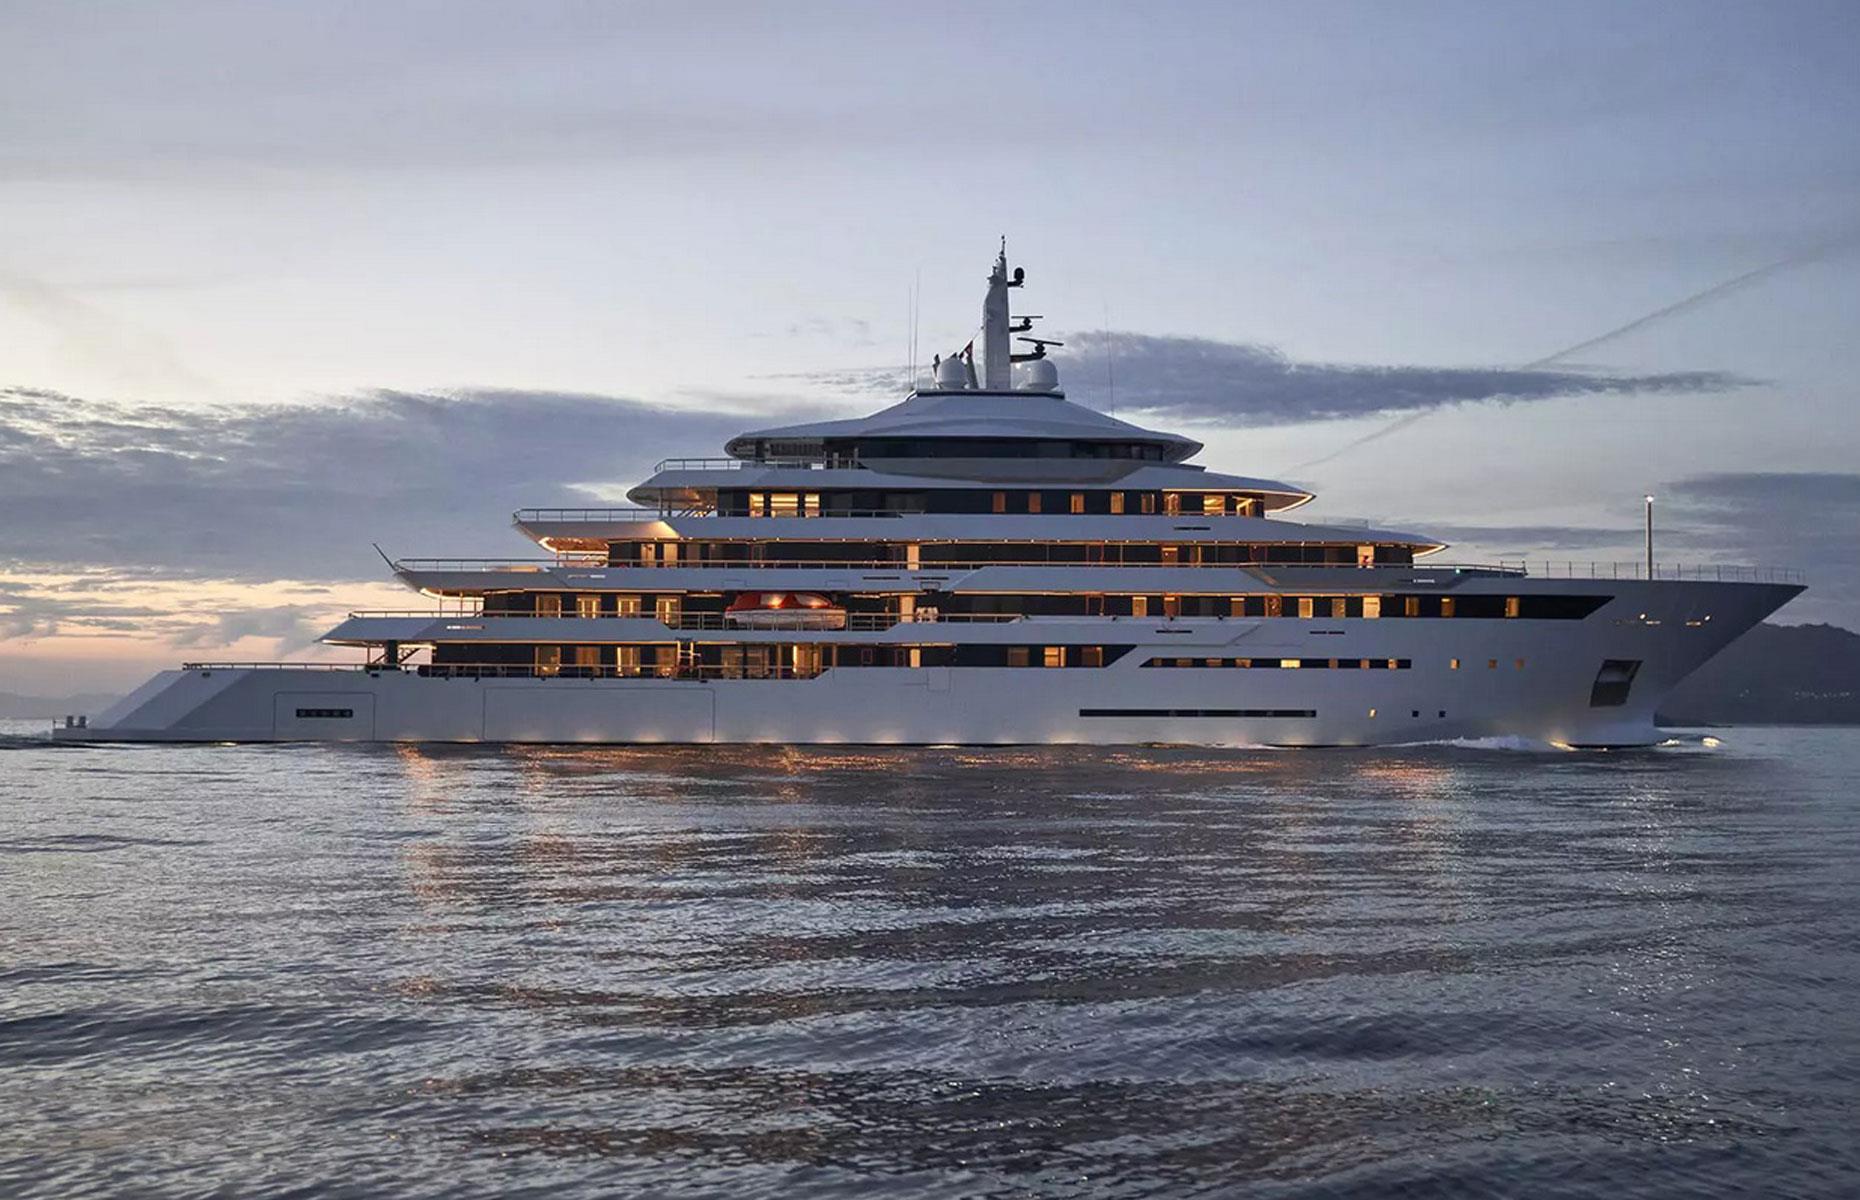 <p>Hot on the heels of delivering the 367-foot <em>Renaissance (NB-724)</em>, the largest ever yacht crafted in Spain (and shown here in all its glory), Freire's Galician shipyard is set to complete another whopper:<em> 105 Explorer (NB-729)</em>, which comes in at 344 feet.</p>  <p><em>Renaissance</em> has been described by Burgess Yachts as a "temple of leisure" and "sanctum of tranquillity." But <em>105 Explorer (NB-729) </em>is more about adventure than relaxation...</p>